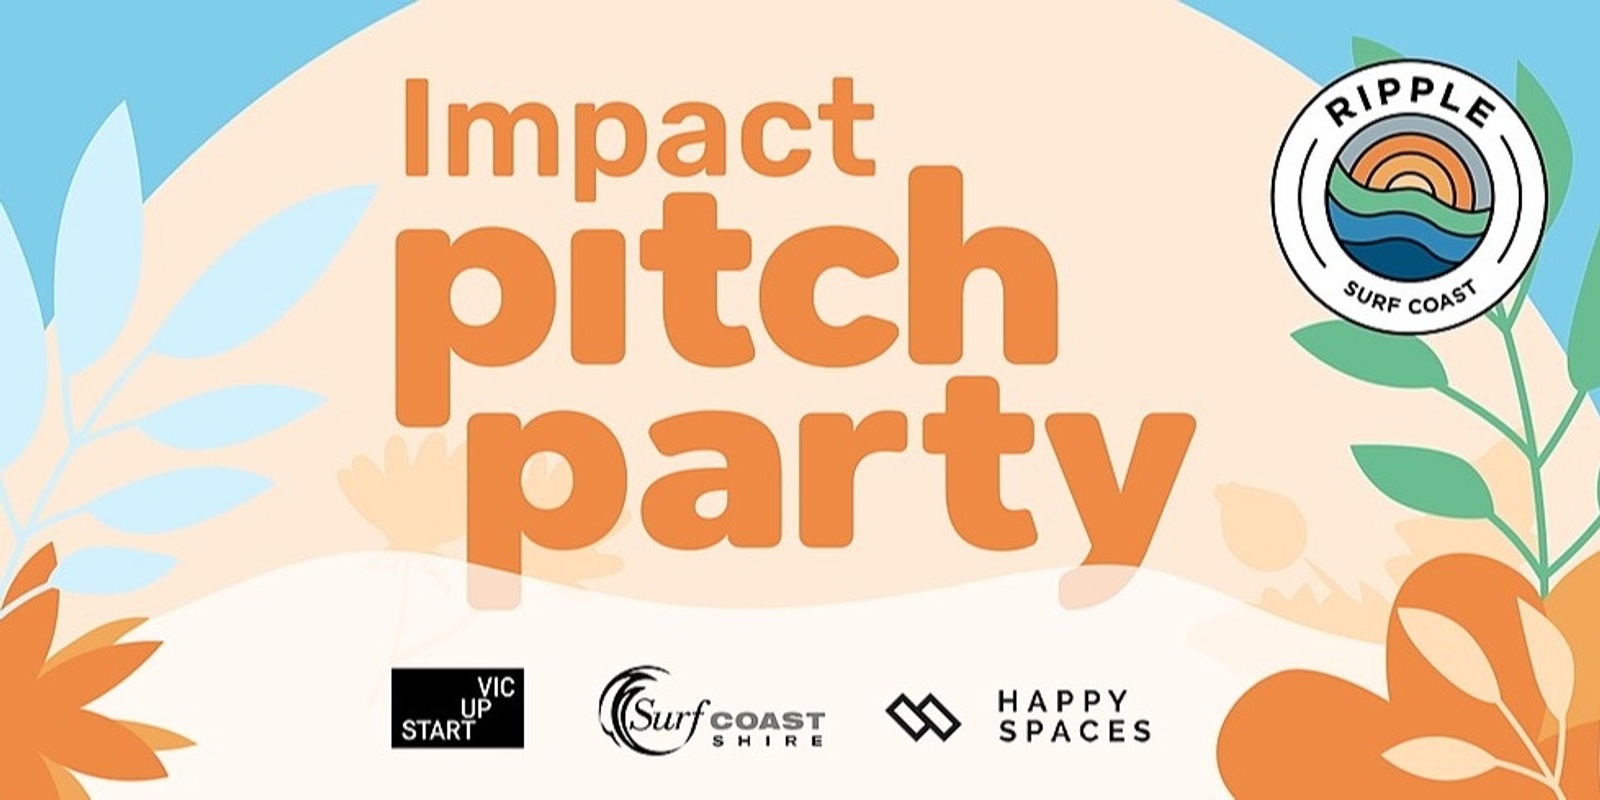 Banner image for Surf Coast Impact Pitch Party